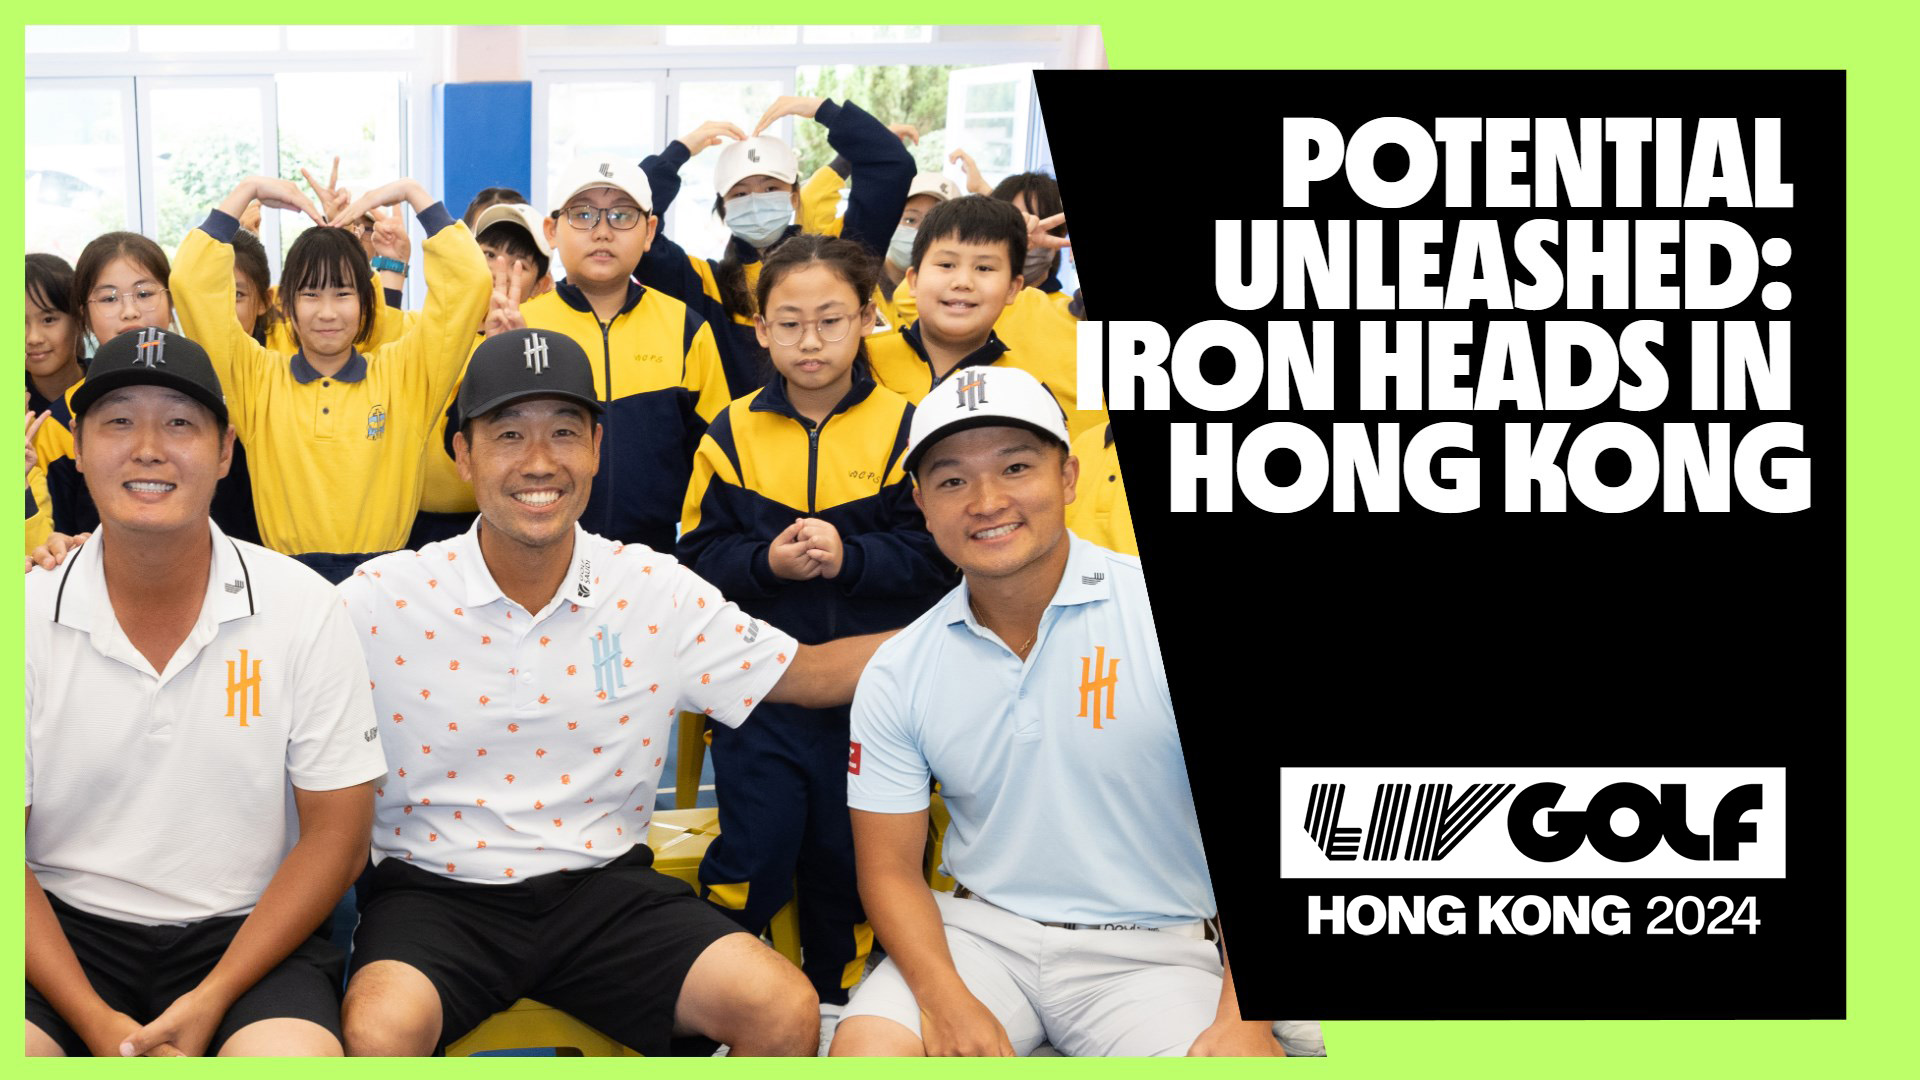 POTENTIAL UNLEAHED: IRON HEADS VISIT STUDENTS IN HONG KONG